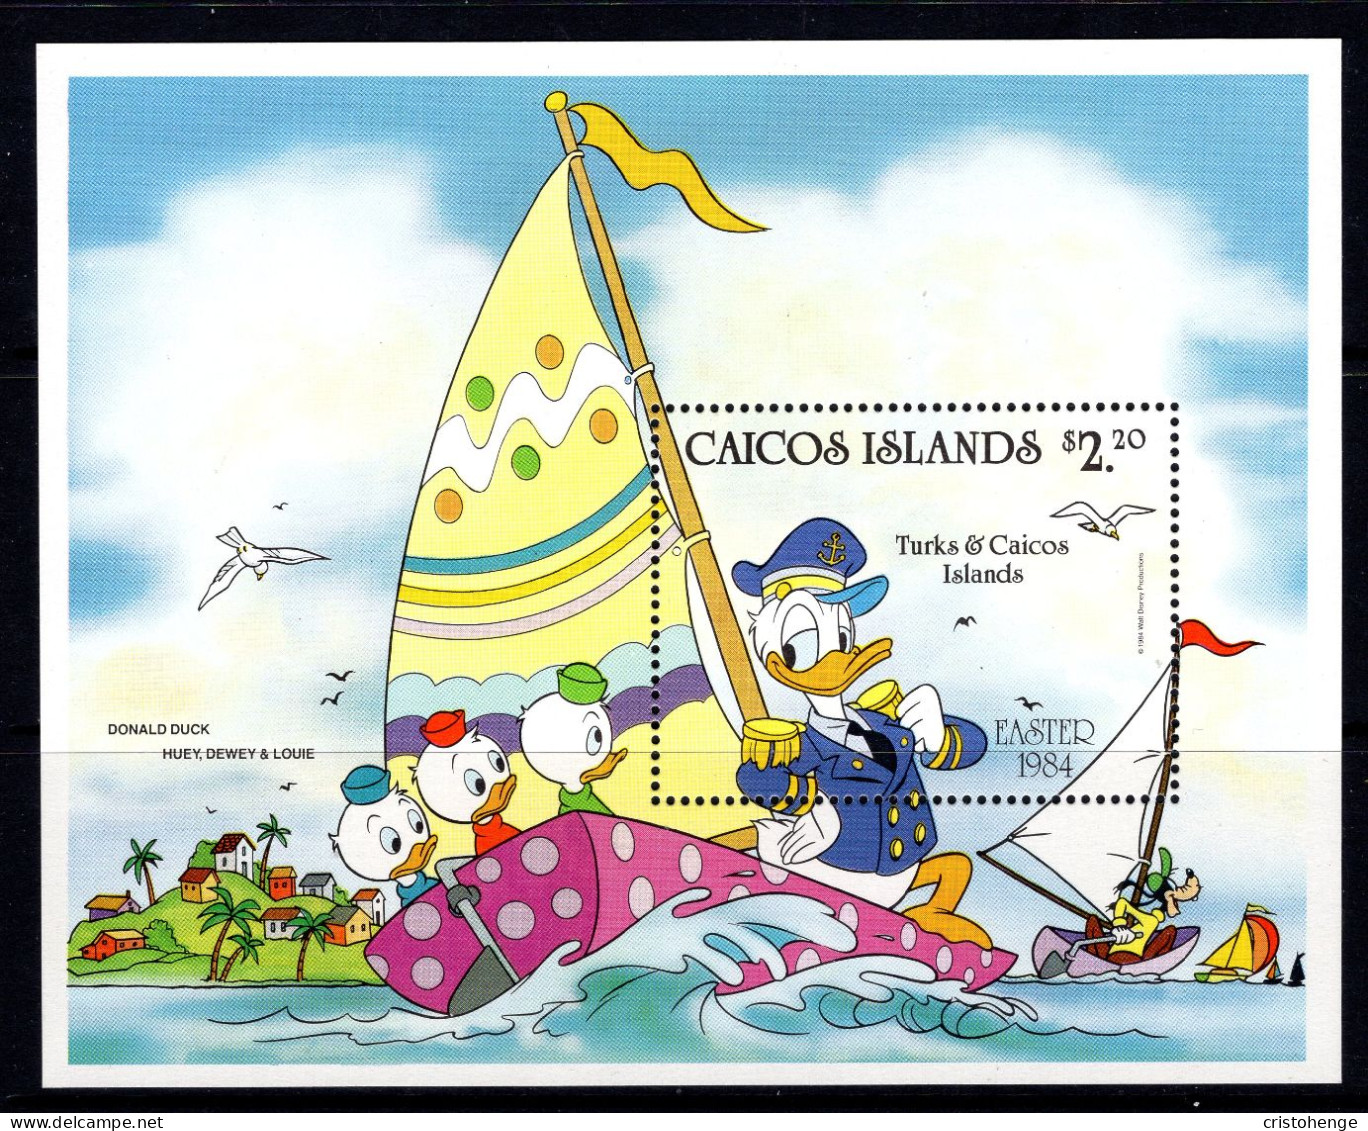 Caicos Islands 1984 Easter - Walt Disney Characters MS MNH (SG MS54) - Turks & Caicos